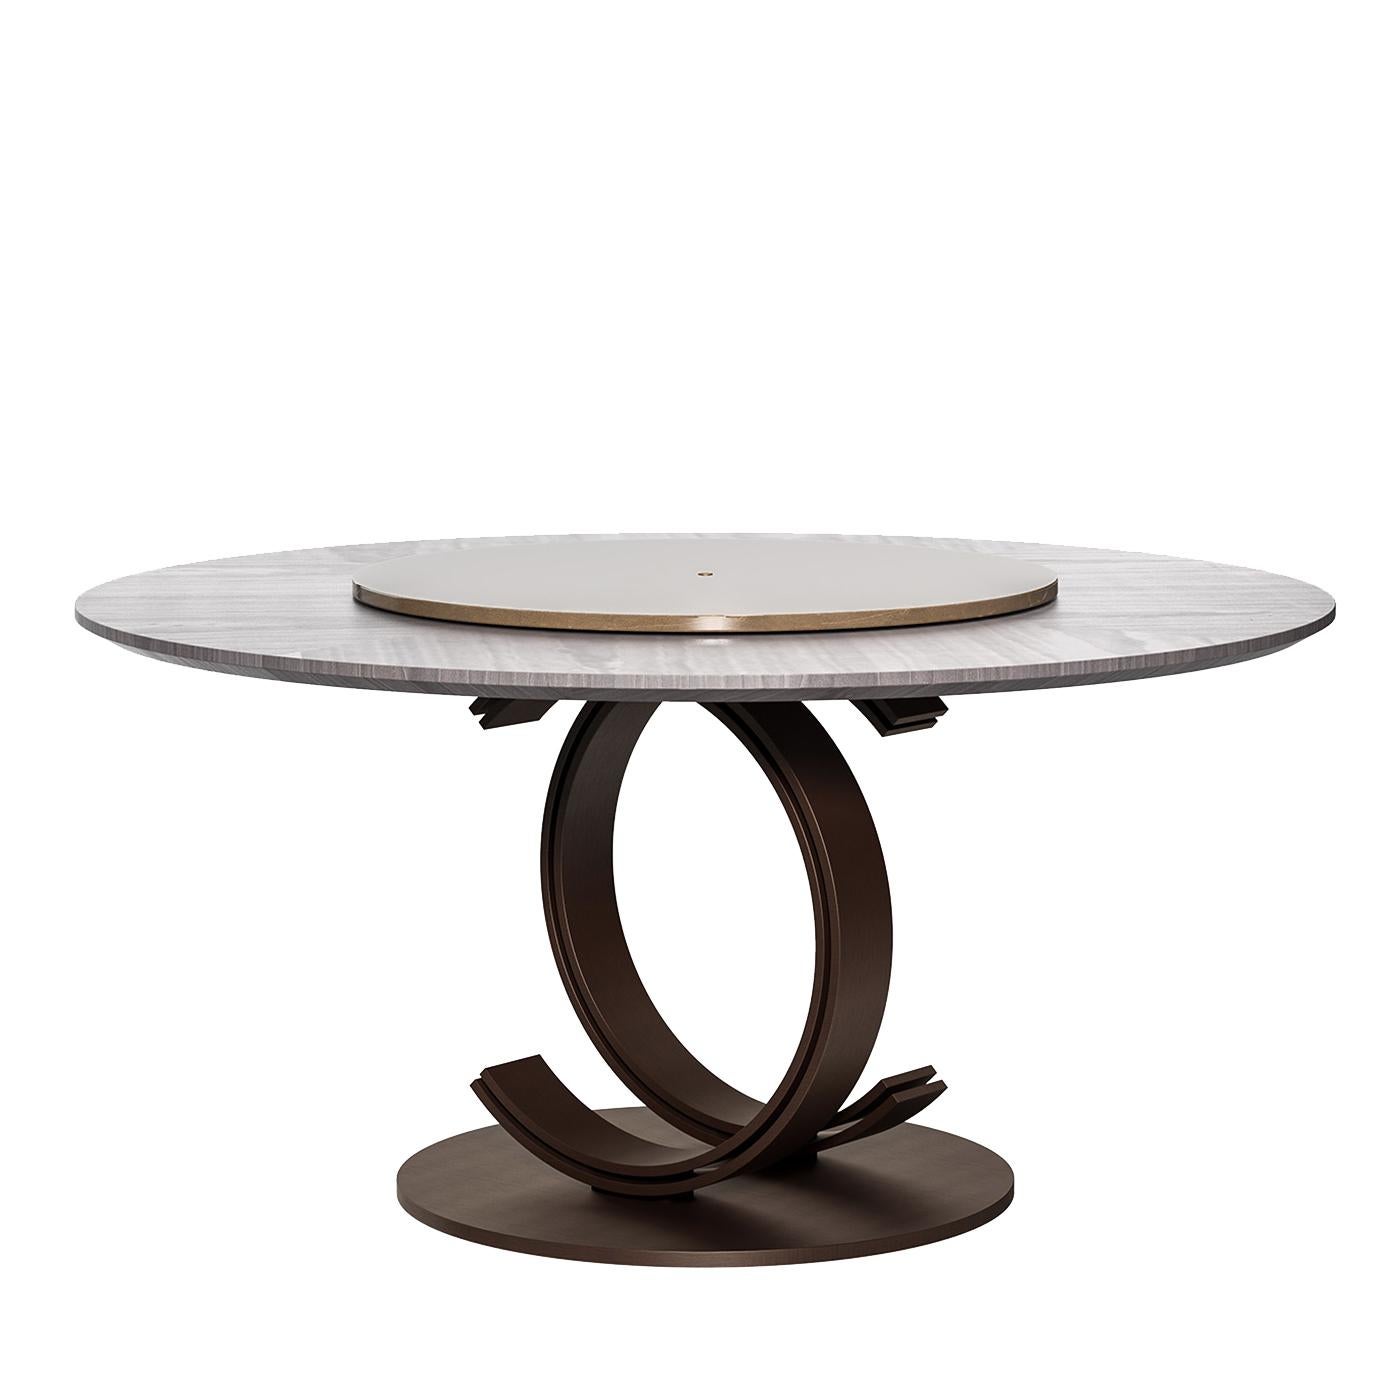 Part of the Bluemoon collection, this superb dining table is a functional piece of art for any dining room. Entirely made of inlaid veneer with a gray pattern of diagonal lines, the stately round top (180 cm diameter) is accented at the center with